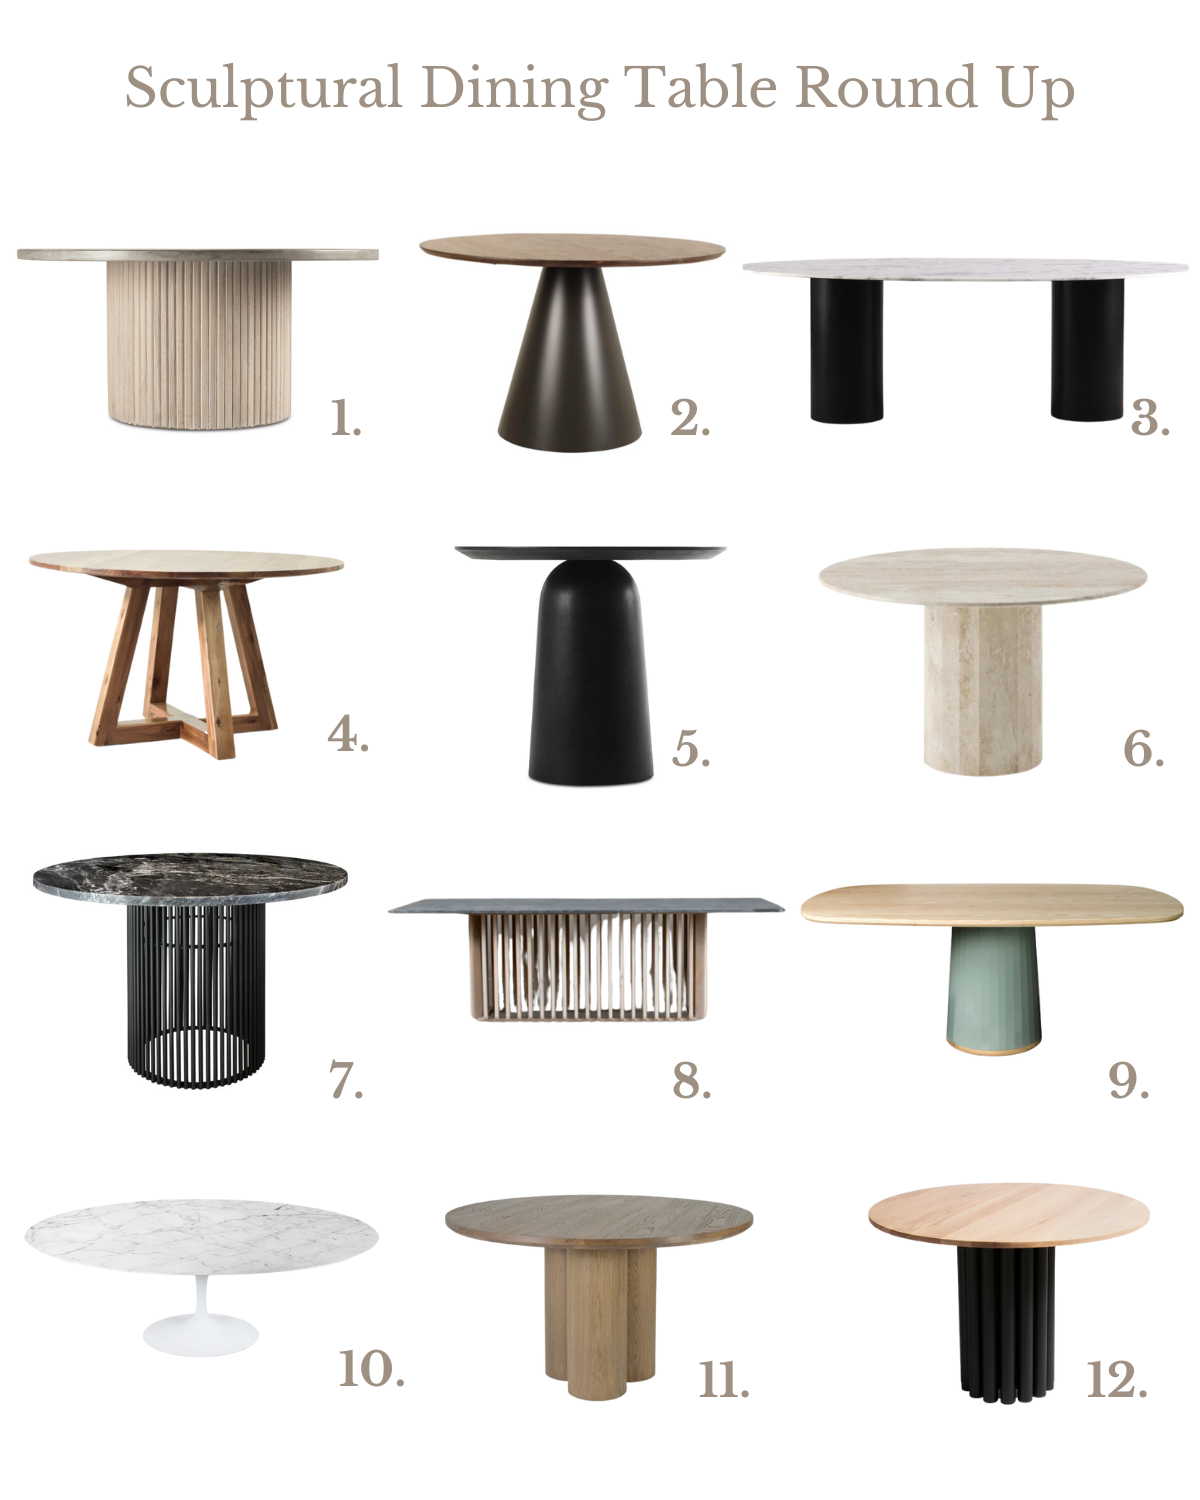 Sculptural Dining Table Round Up